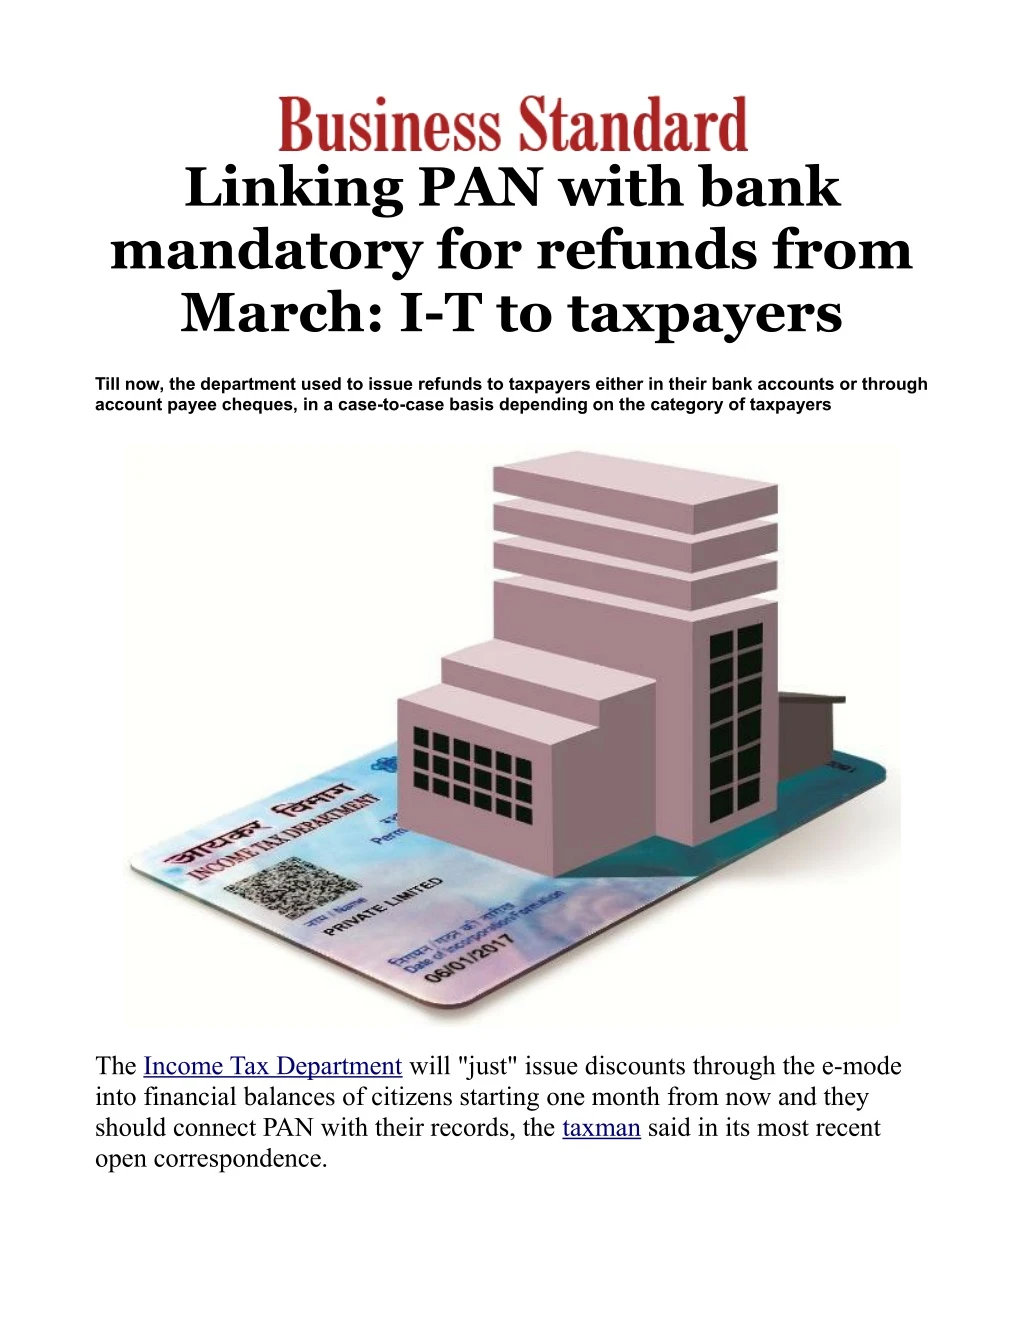 linking pan with bank mandatory for refunds from